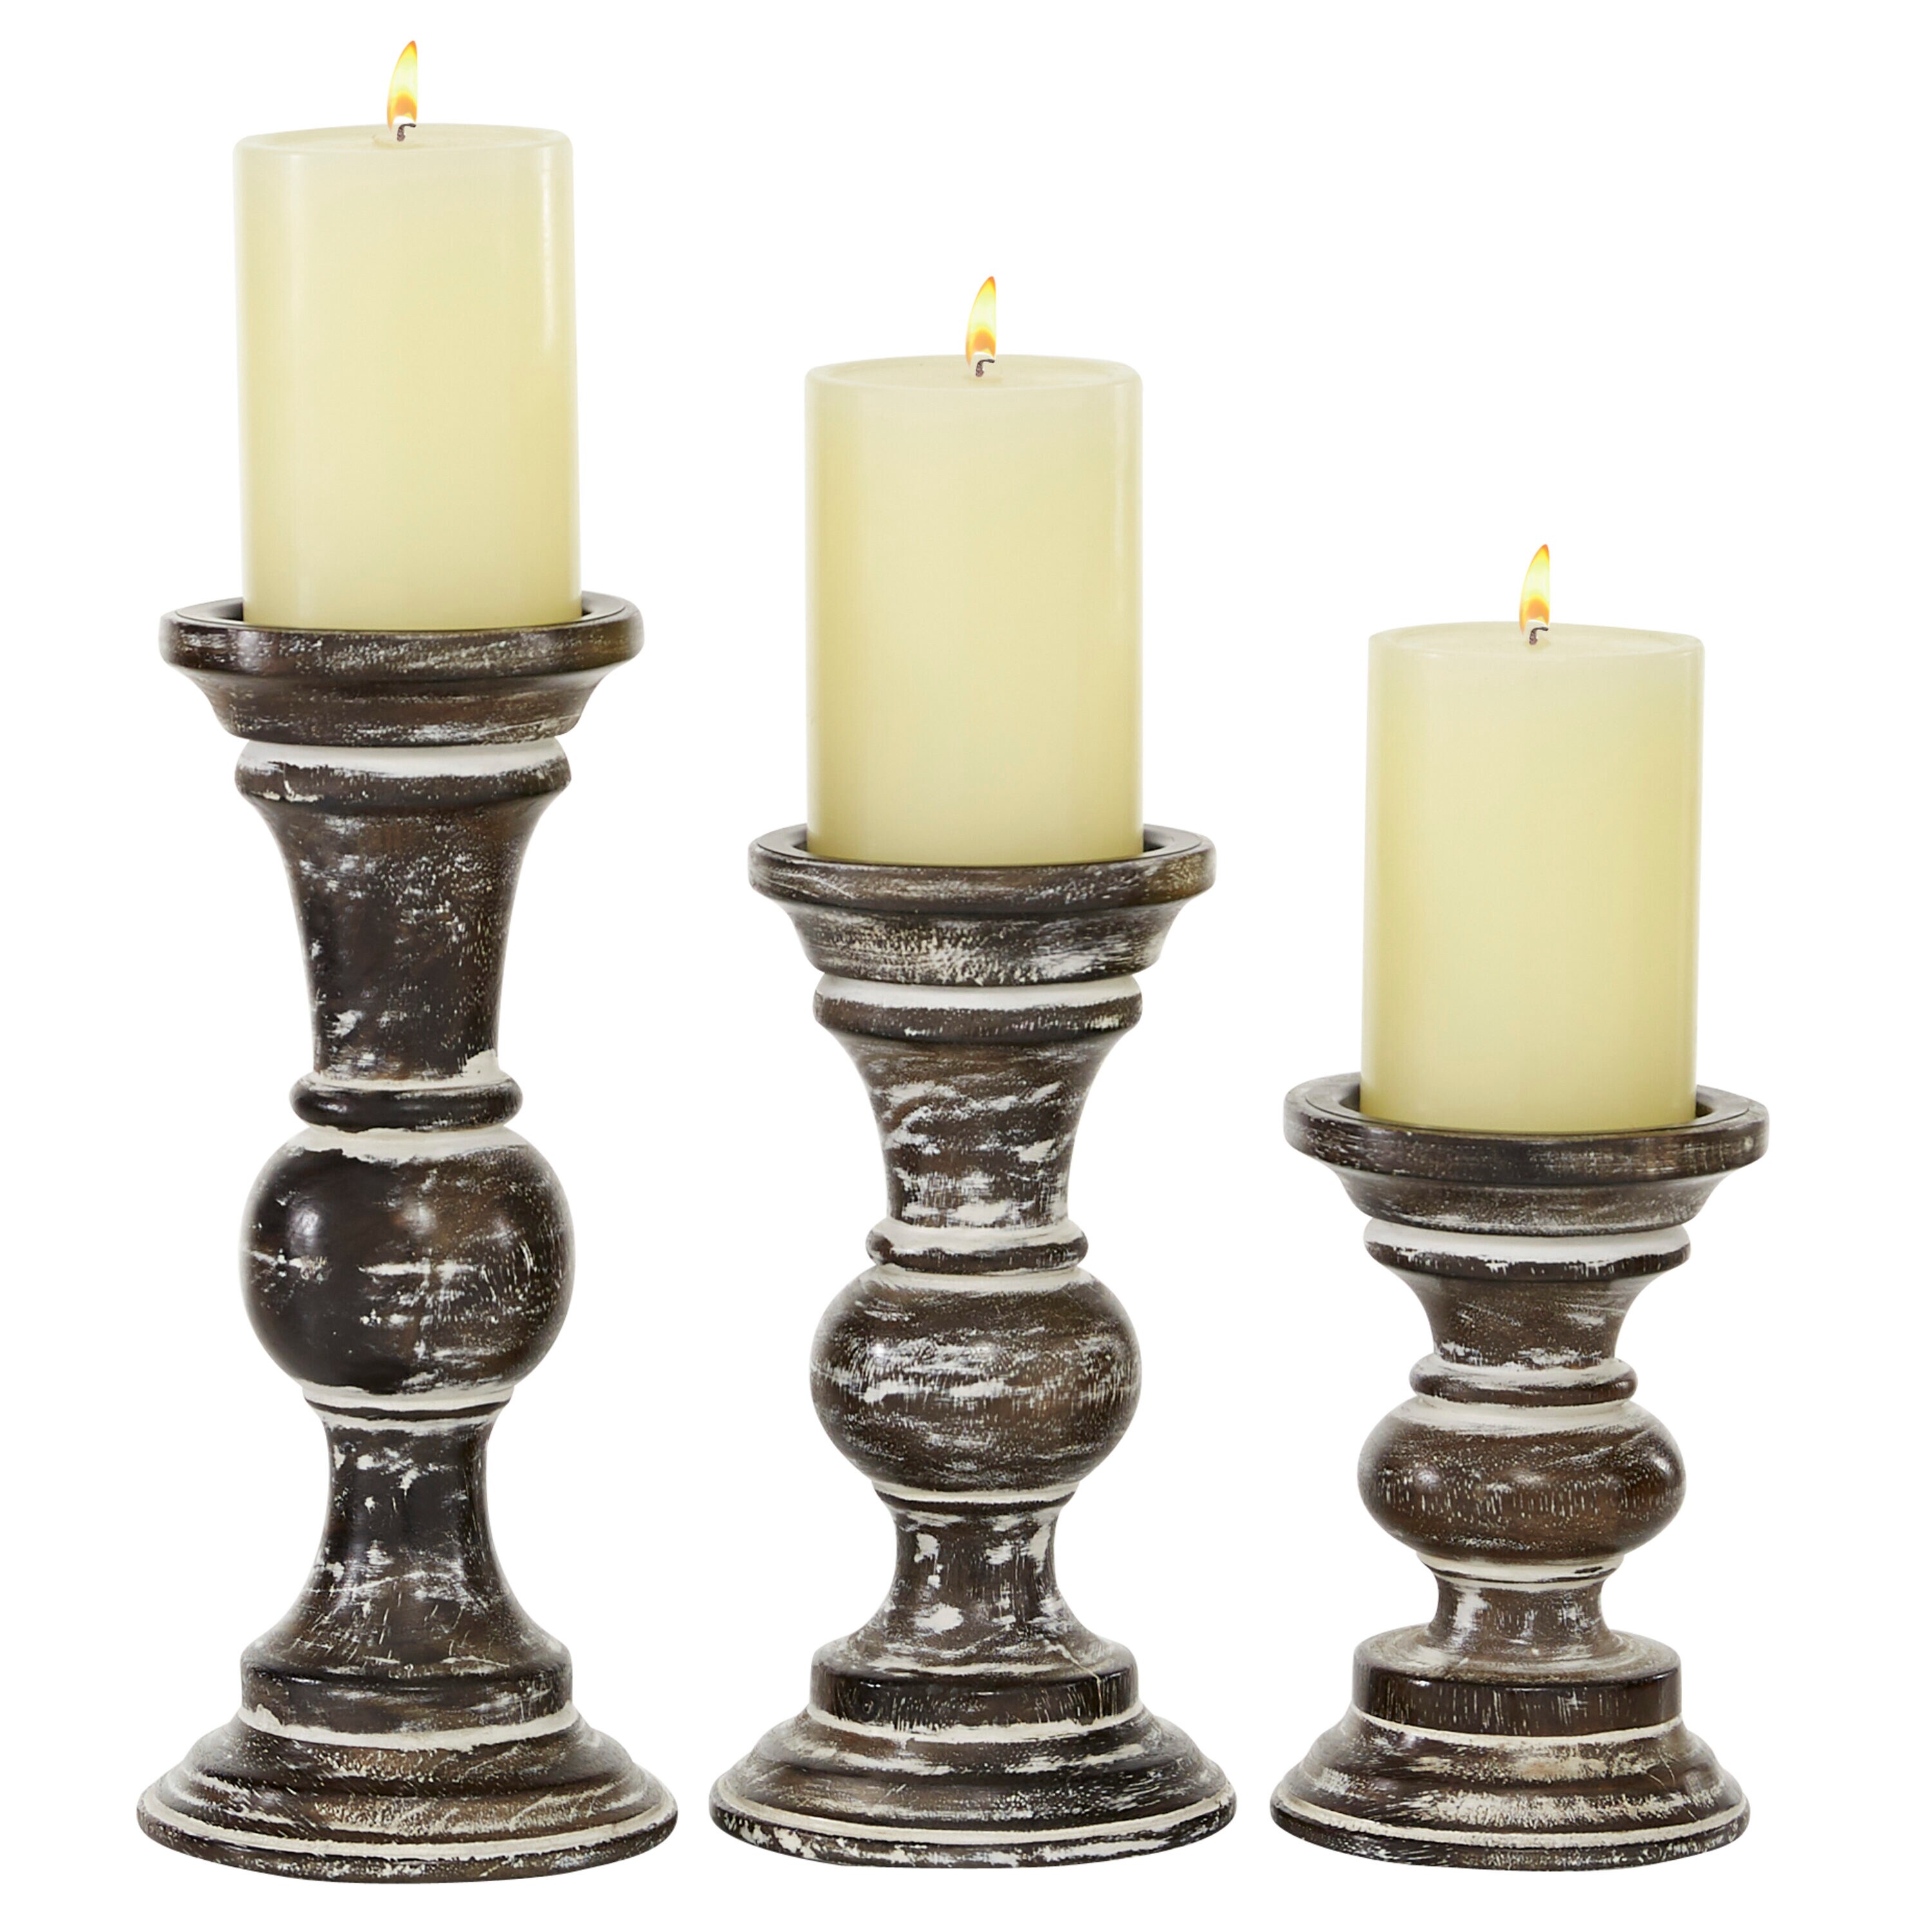 Grayson Lane 3 Candle Wood Pillar Candle Holder at Lowes.com